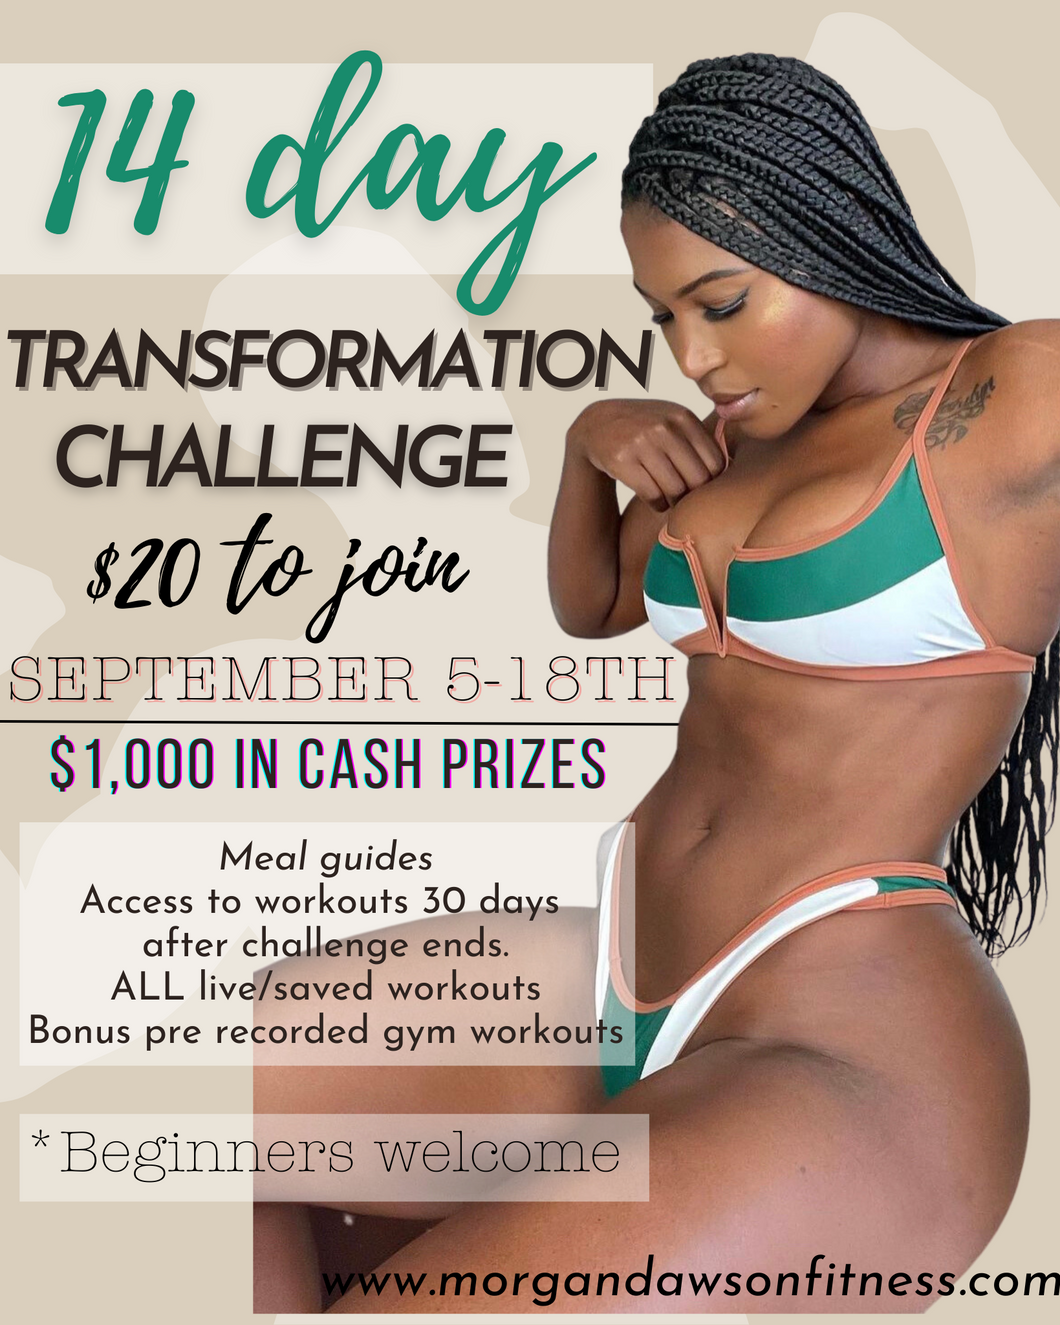 14 day transformation challenge Sep 5th-18th